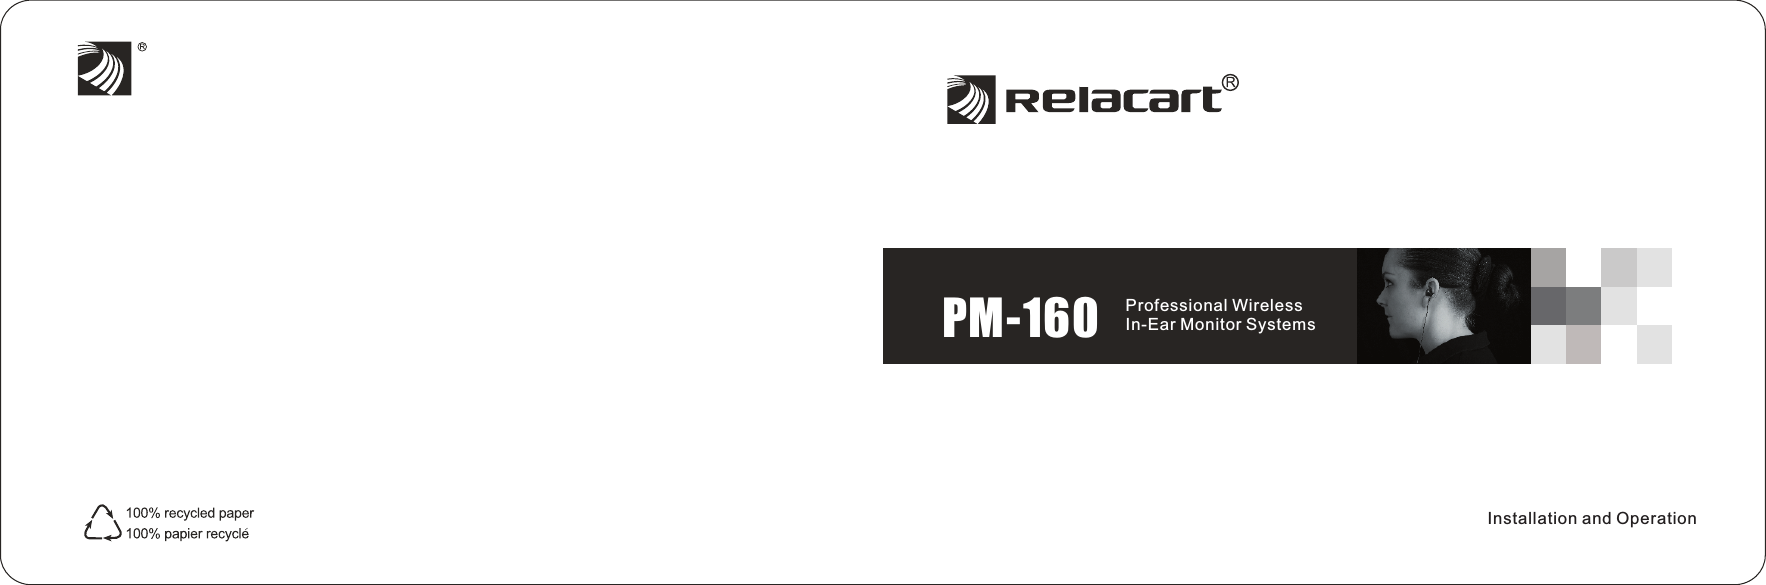 PM-160 Professional Wireless In-Ear Monitor Systems  Installation and Operation